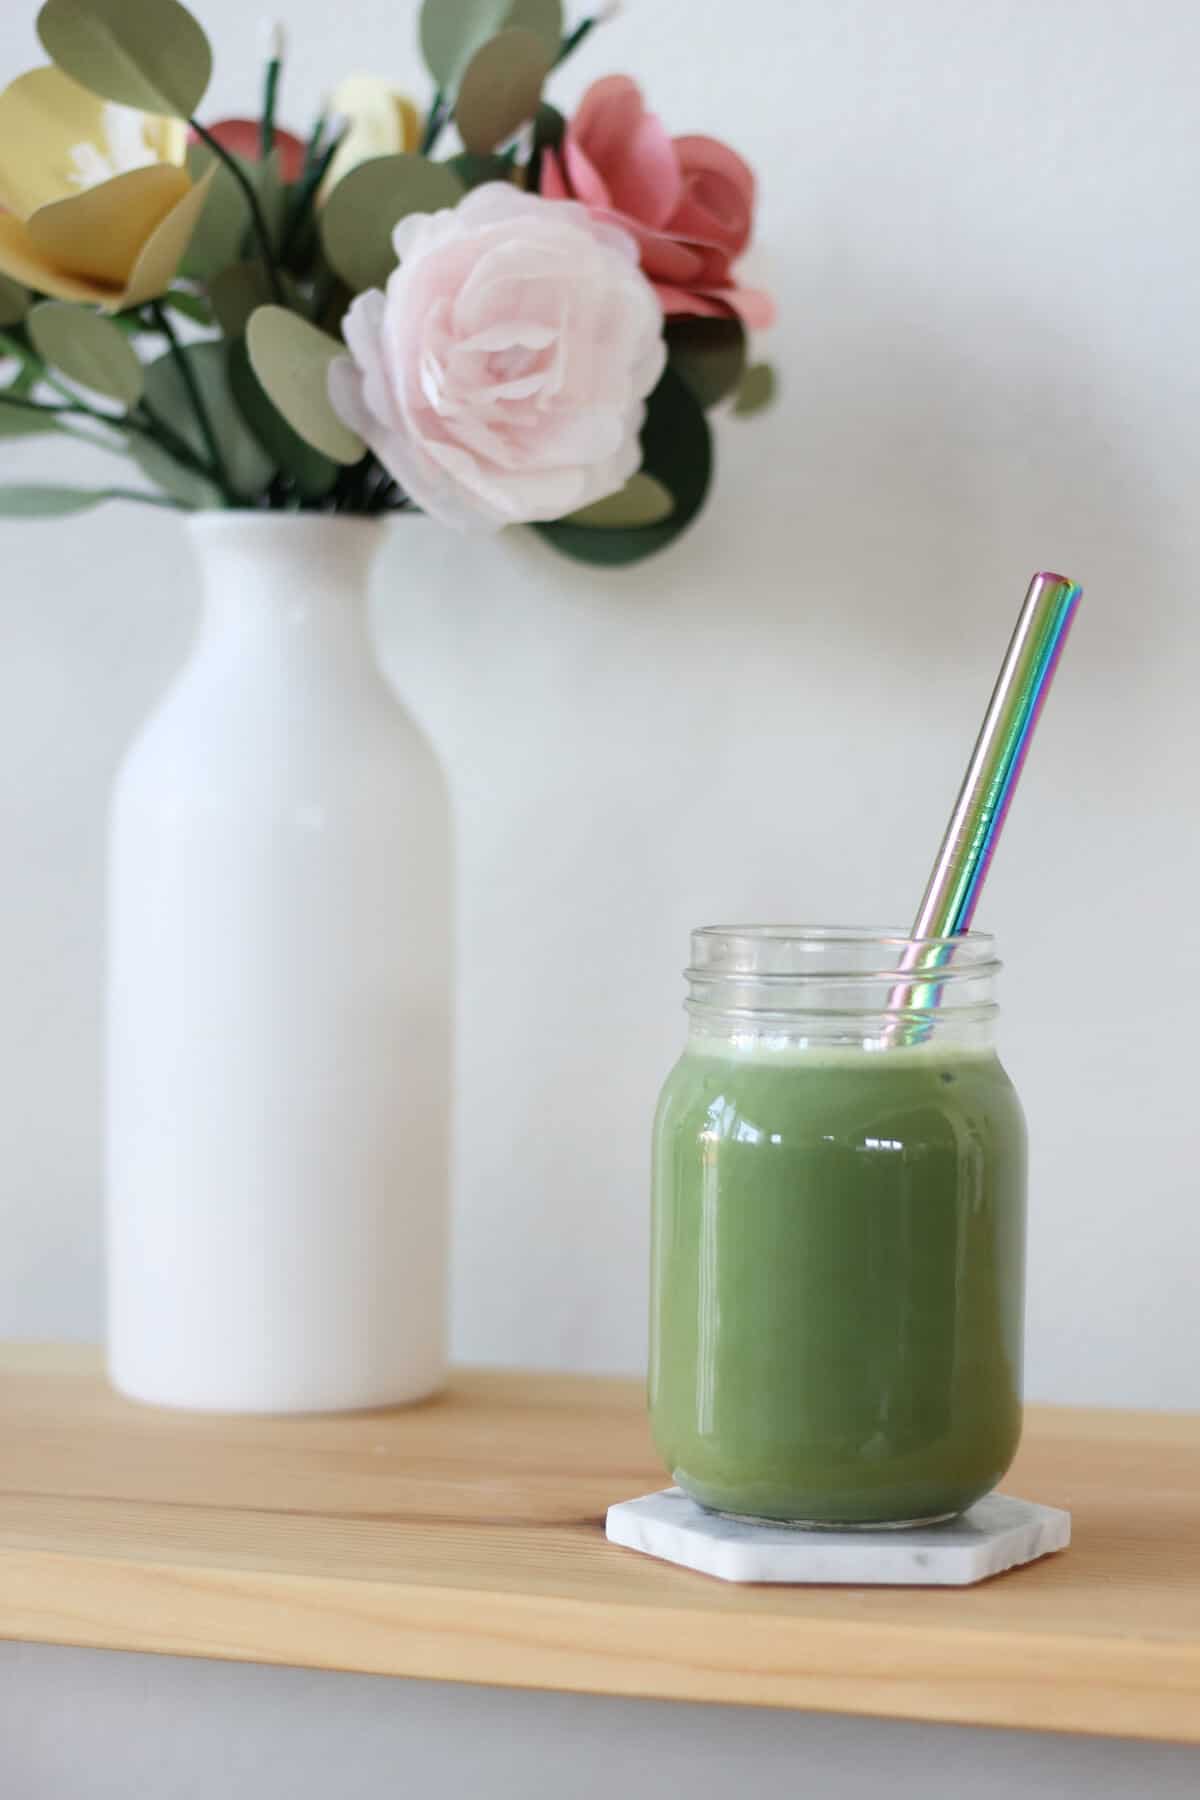 Clear jar with bright green matcha and a straw. There's a vase of flowers in the background.